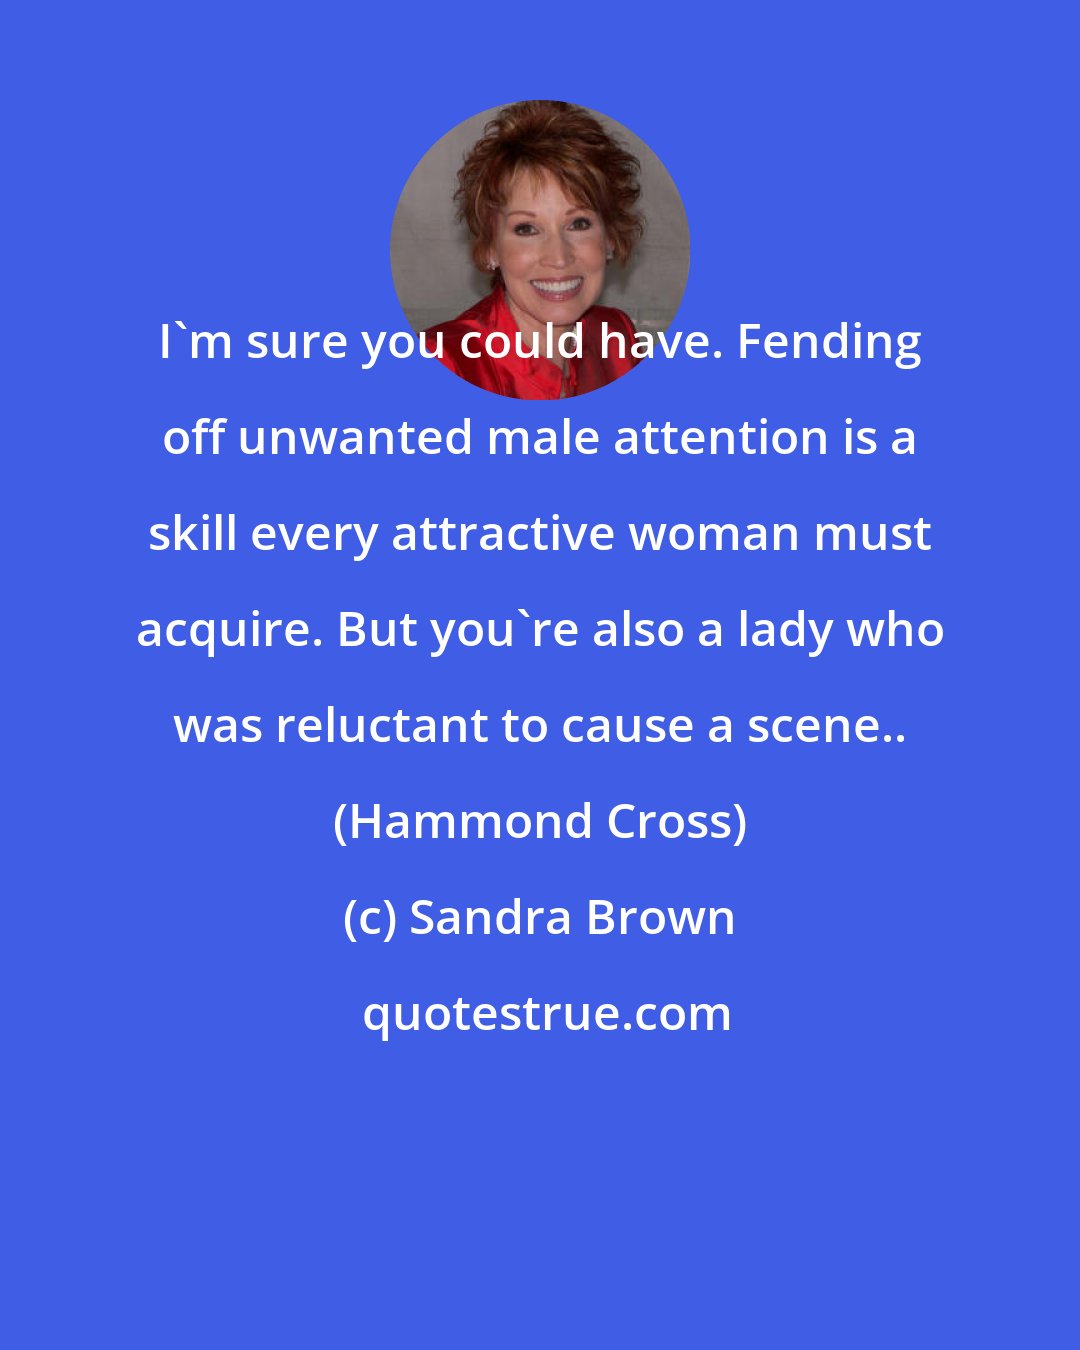 Sandra Brown: I'm sure you could have. Fending off unwanted male attention is a skill every attractive woman must acquire. But you're also a lady who was reluctant to cause a scene.. (Hammond Cross)